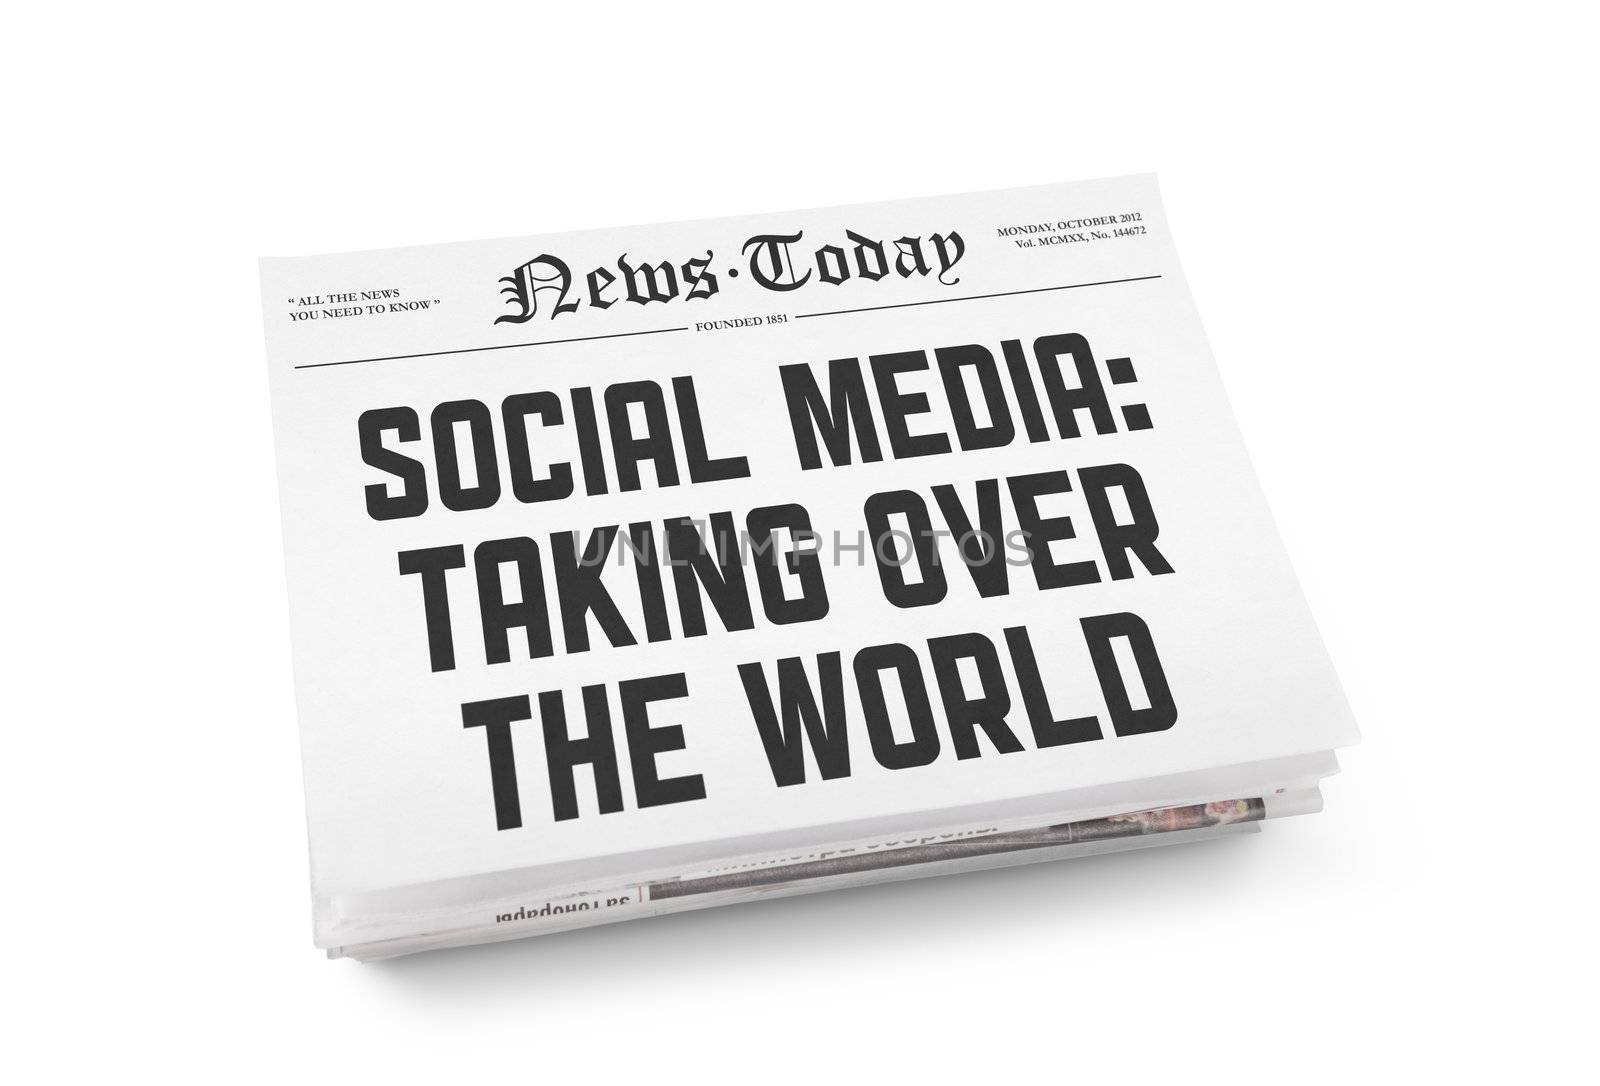 A stack of newspapers with headline "Social media: Taking over the world". Isolated on white.